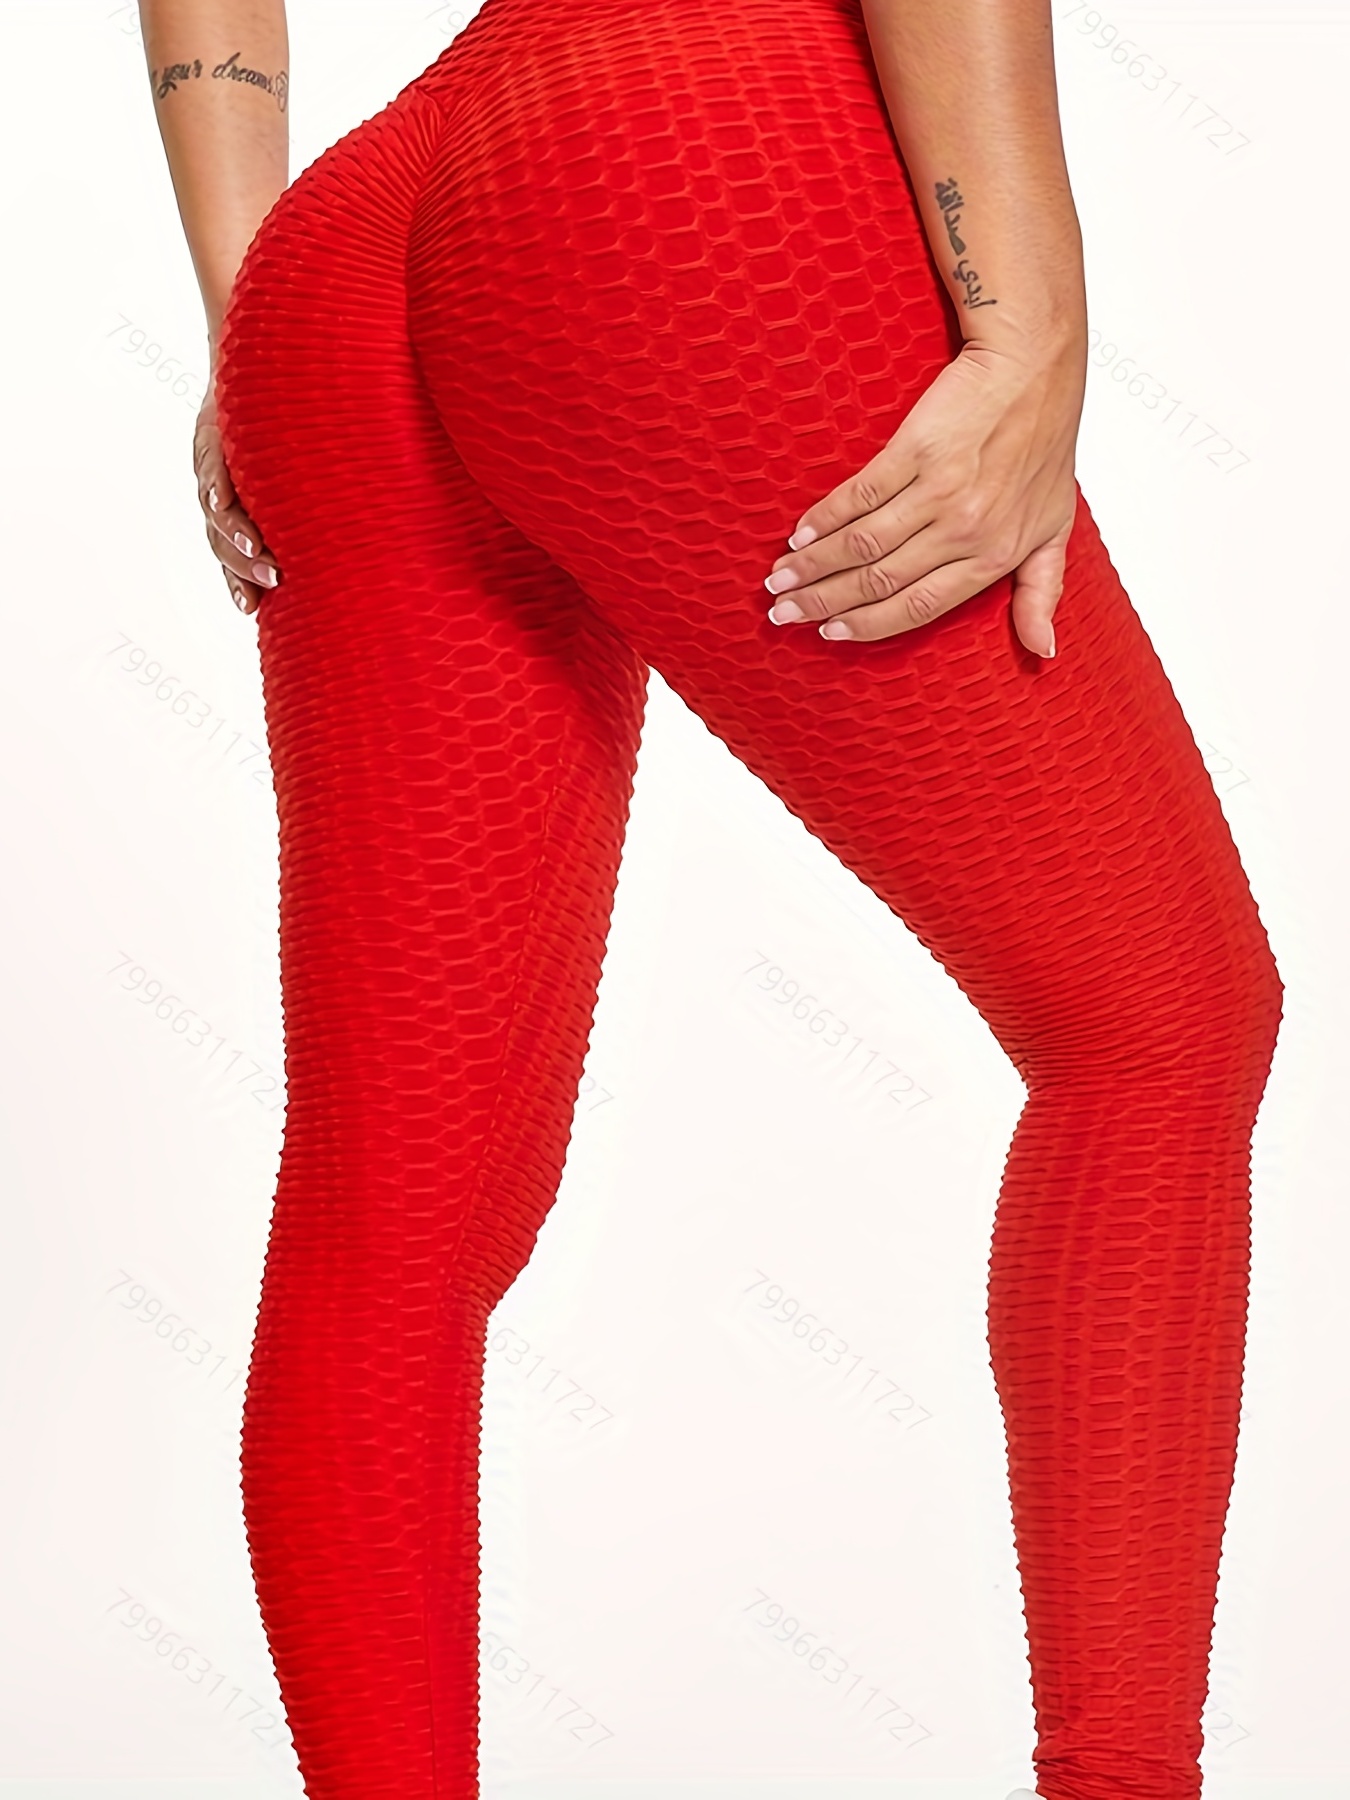 Women's yoga pants mesh red casual seamless knit buttocks fast sweating  tight fitting sports fitness pants show buttocks pants 2